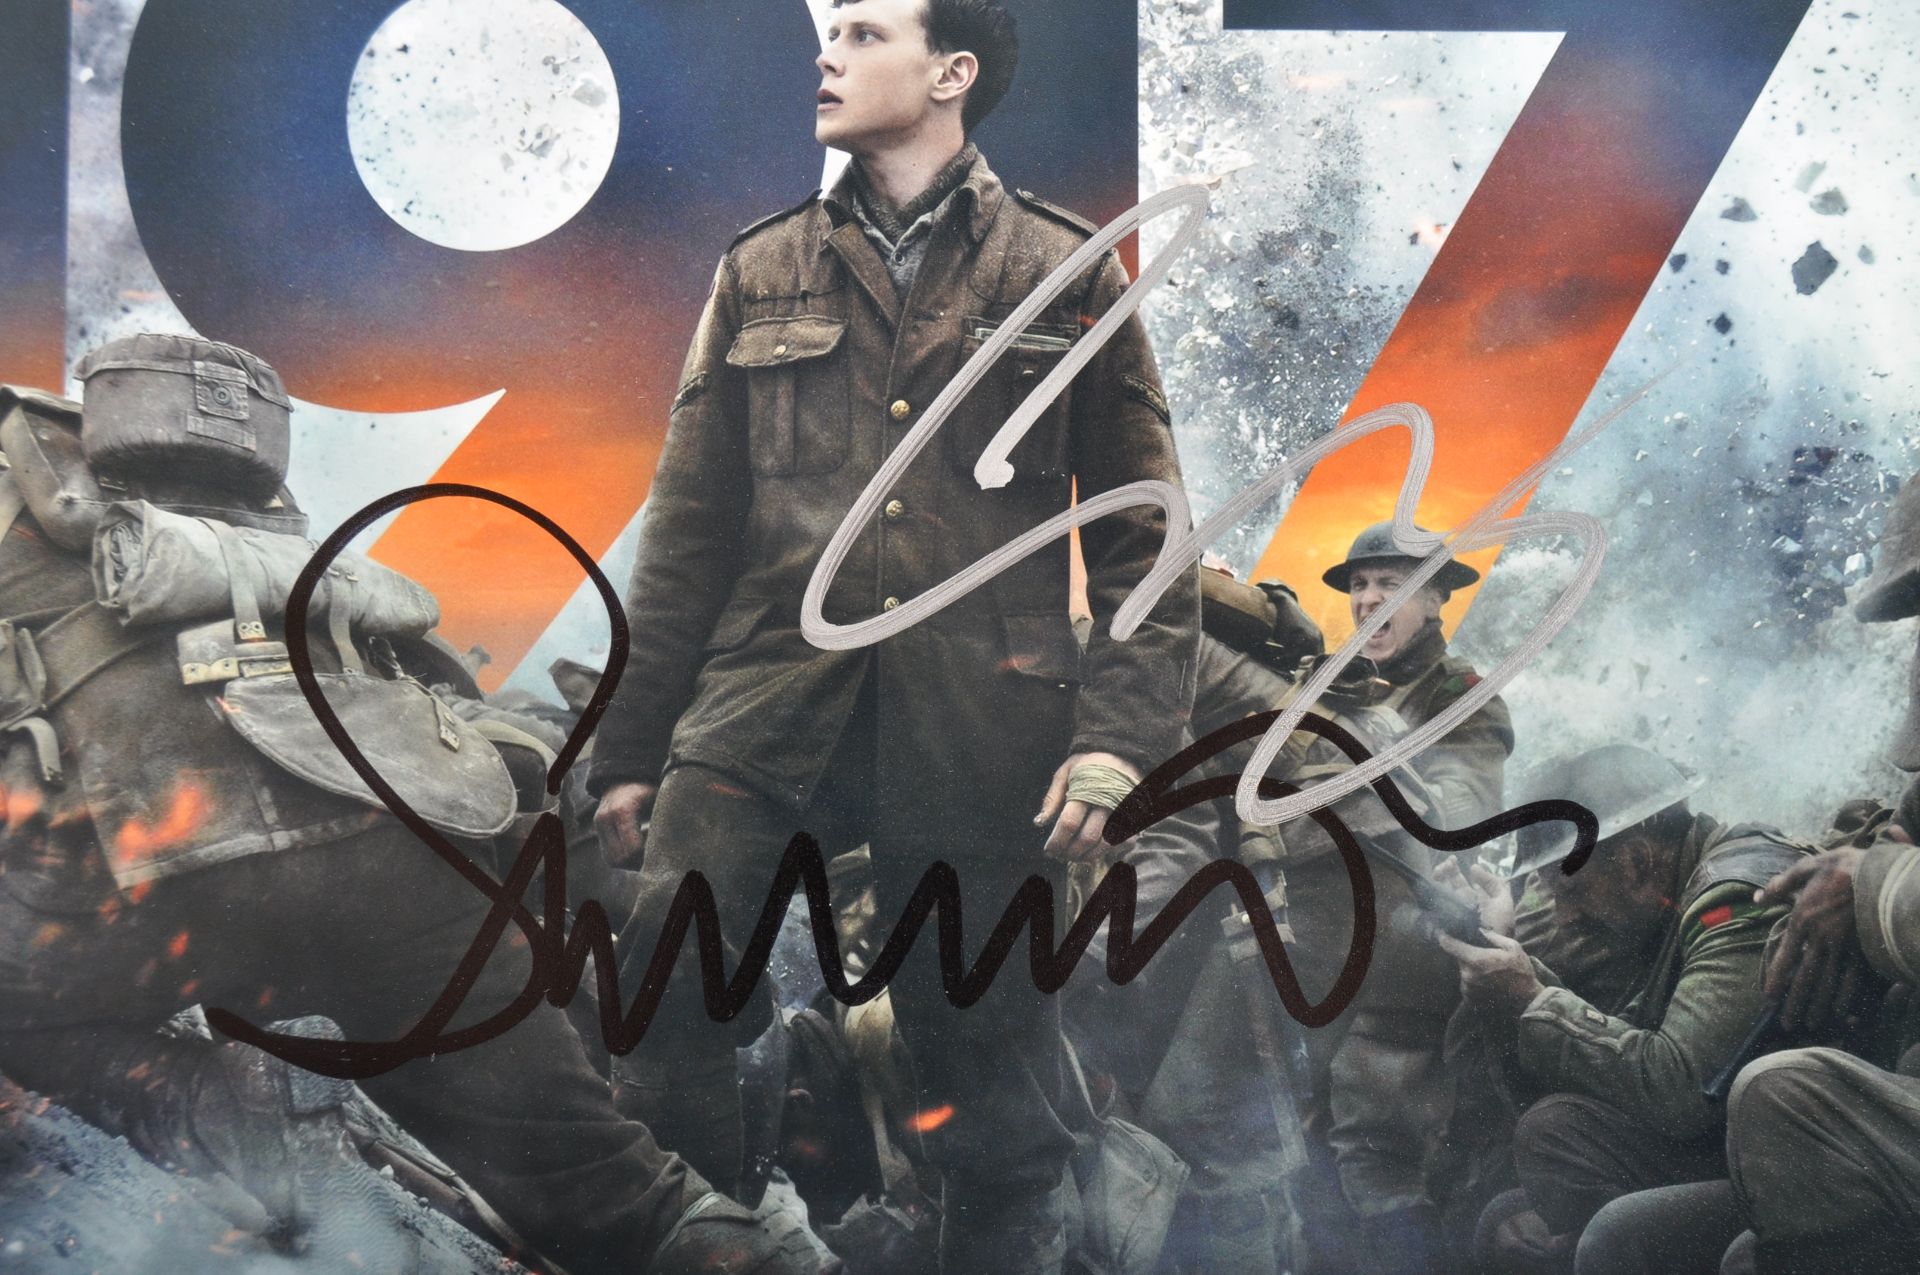 1917 (2019) - SAM MENDES & GEORGE MACKAY - DUAL SIGNED PHOTOGRAPH - Image 2 of 2